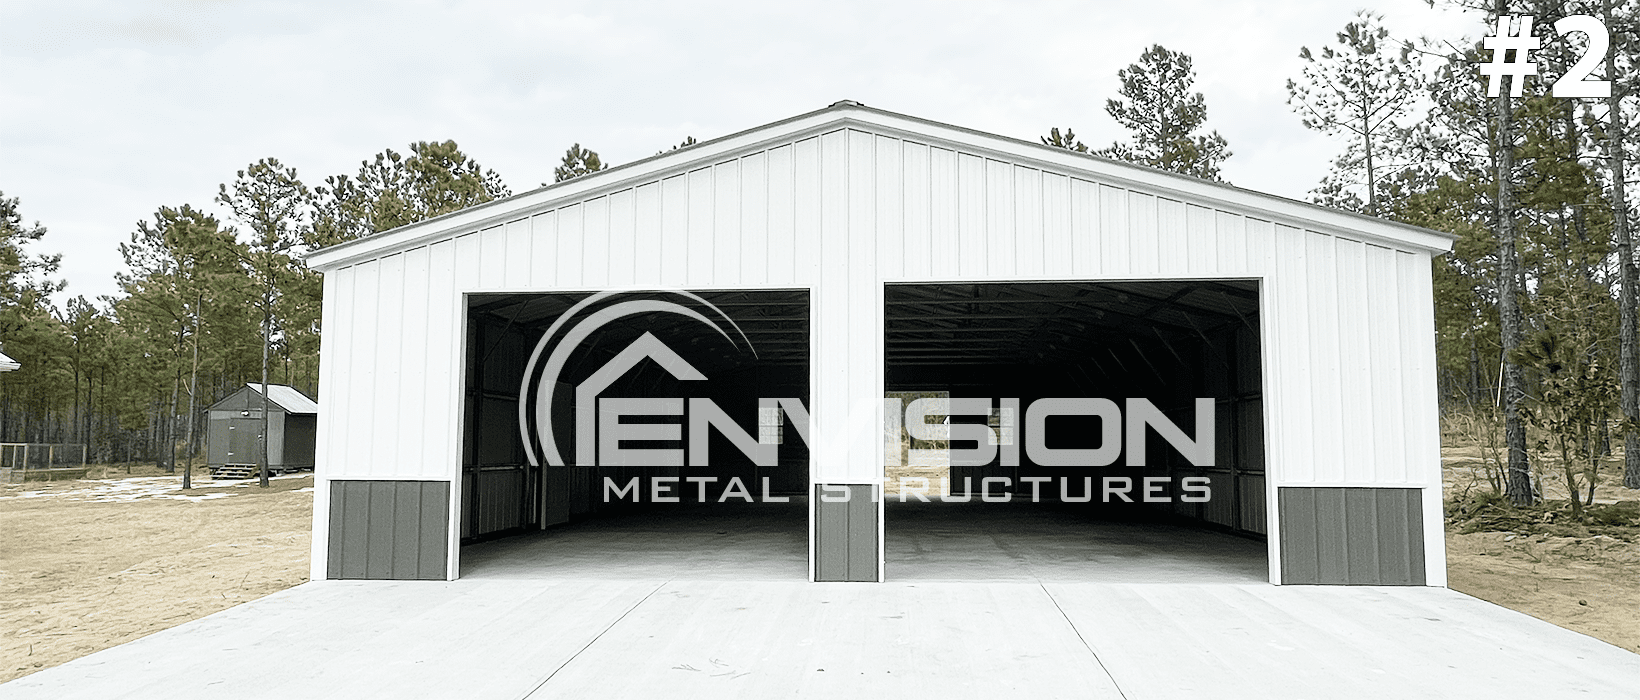 Two Tone Commercial Metal Structure #2